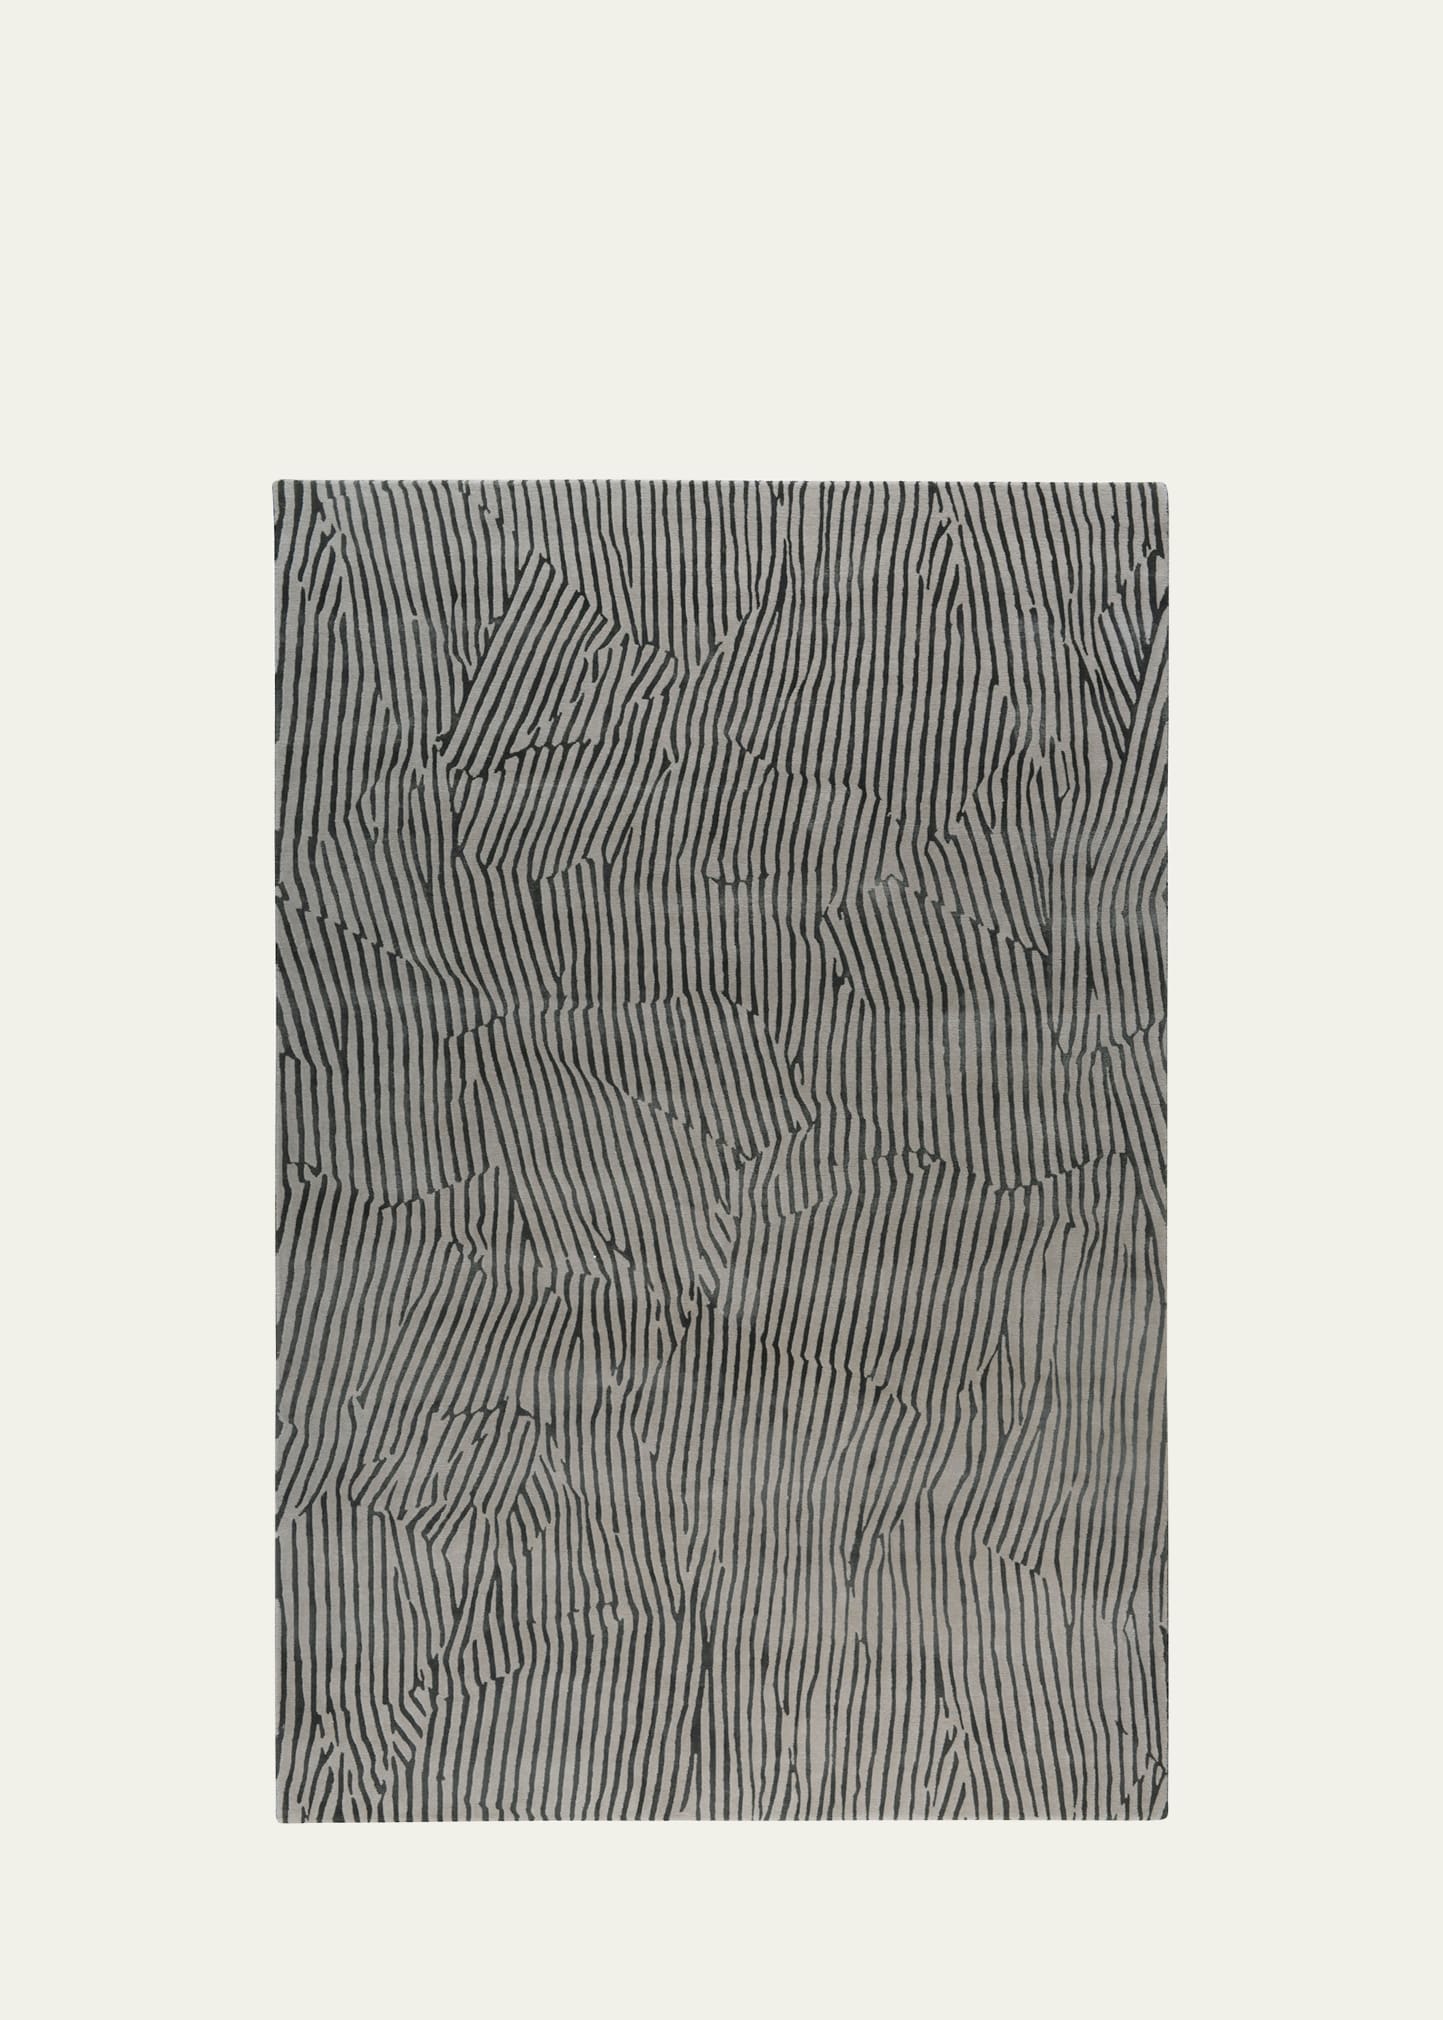 Avant Graphite Shaped Hand-Knotted Rug, 9' x 12'